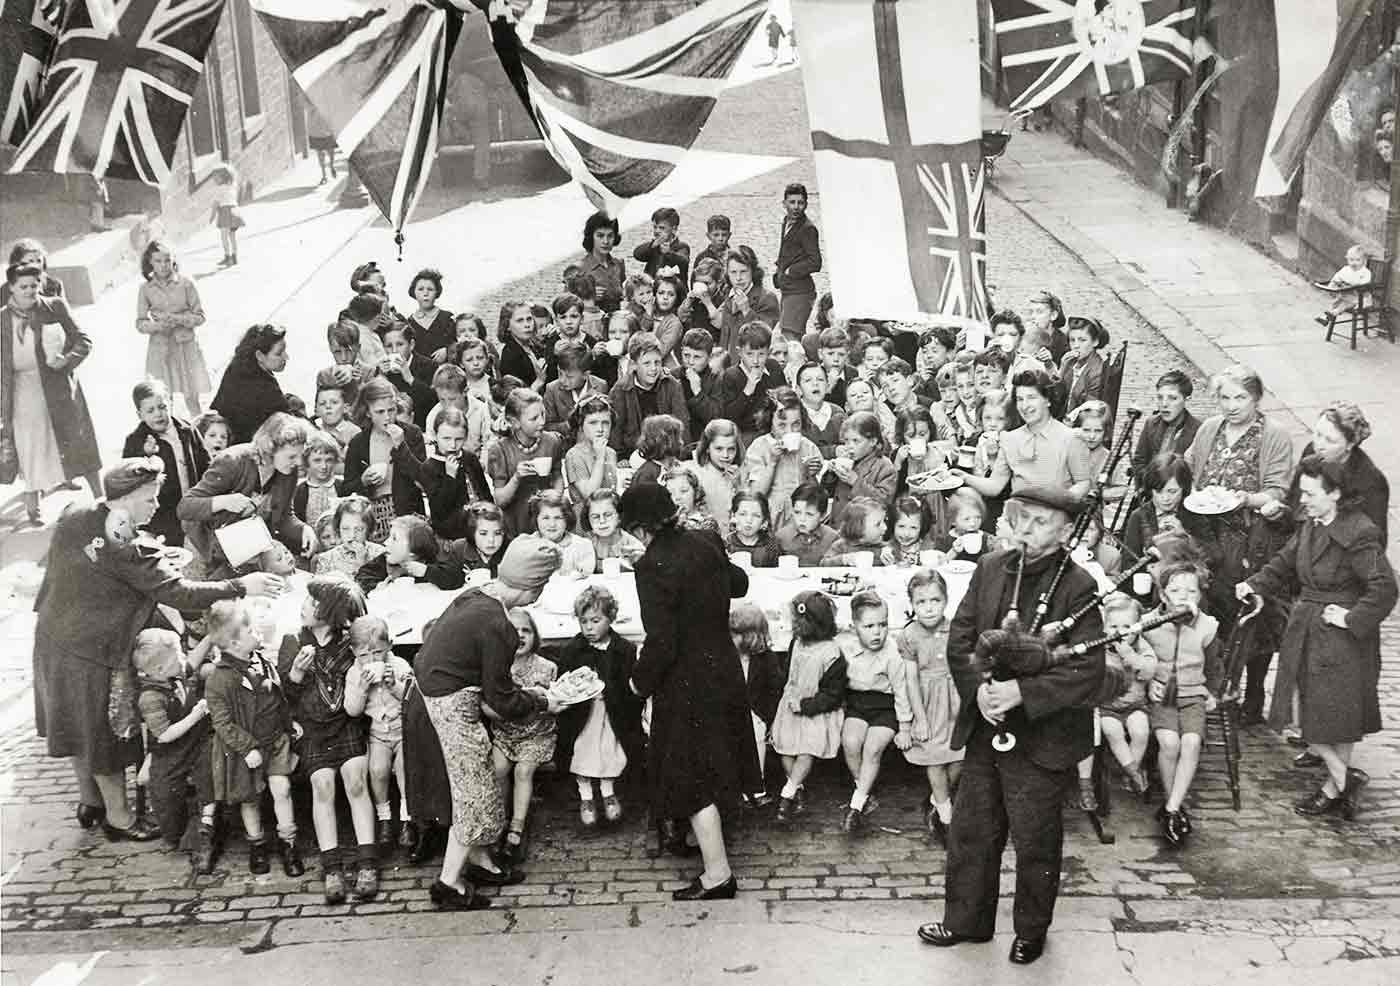 Victory Tea arty at Heriot Mount, 1946